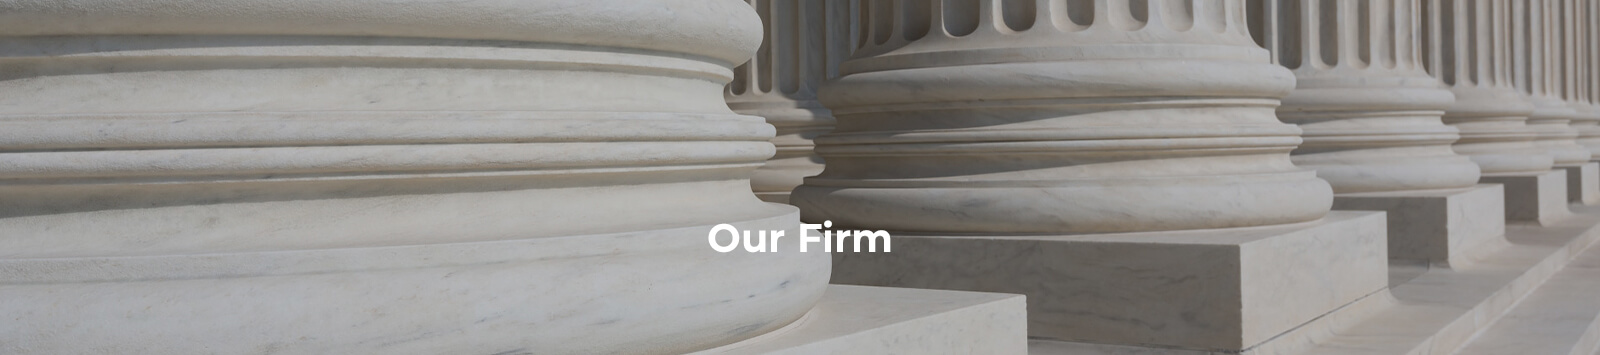 Wisconsin Business Law Firm - Madison Business Lawyers 